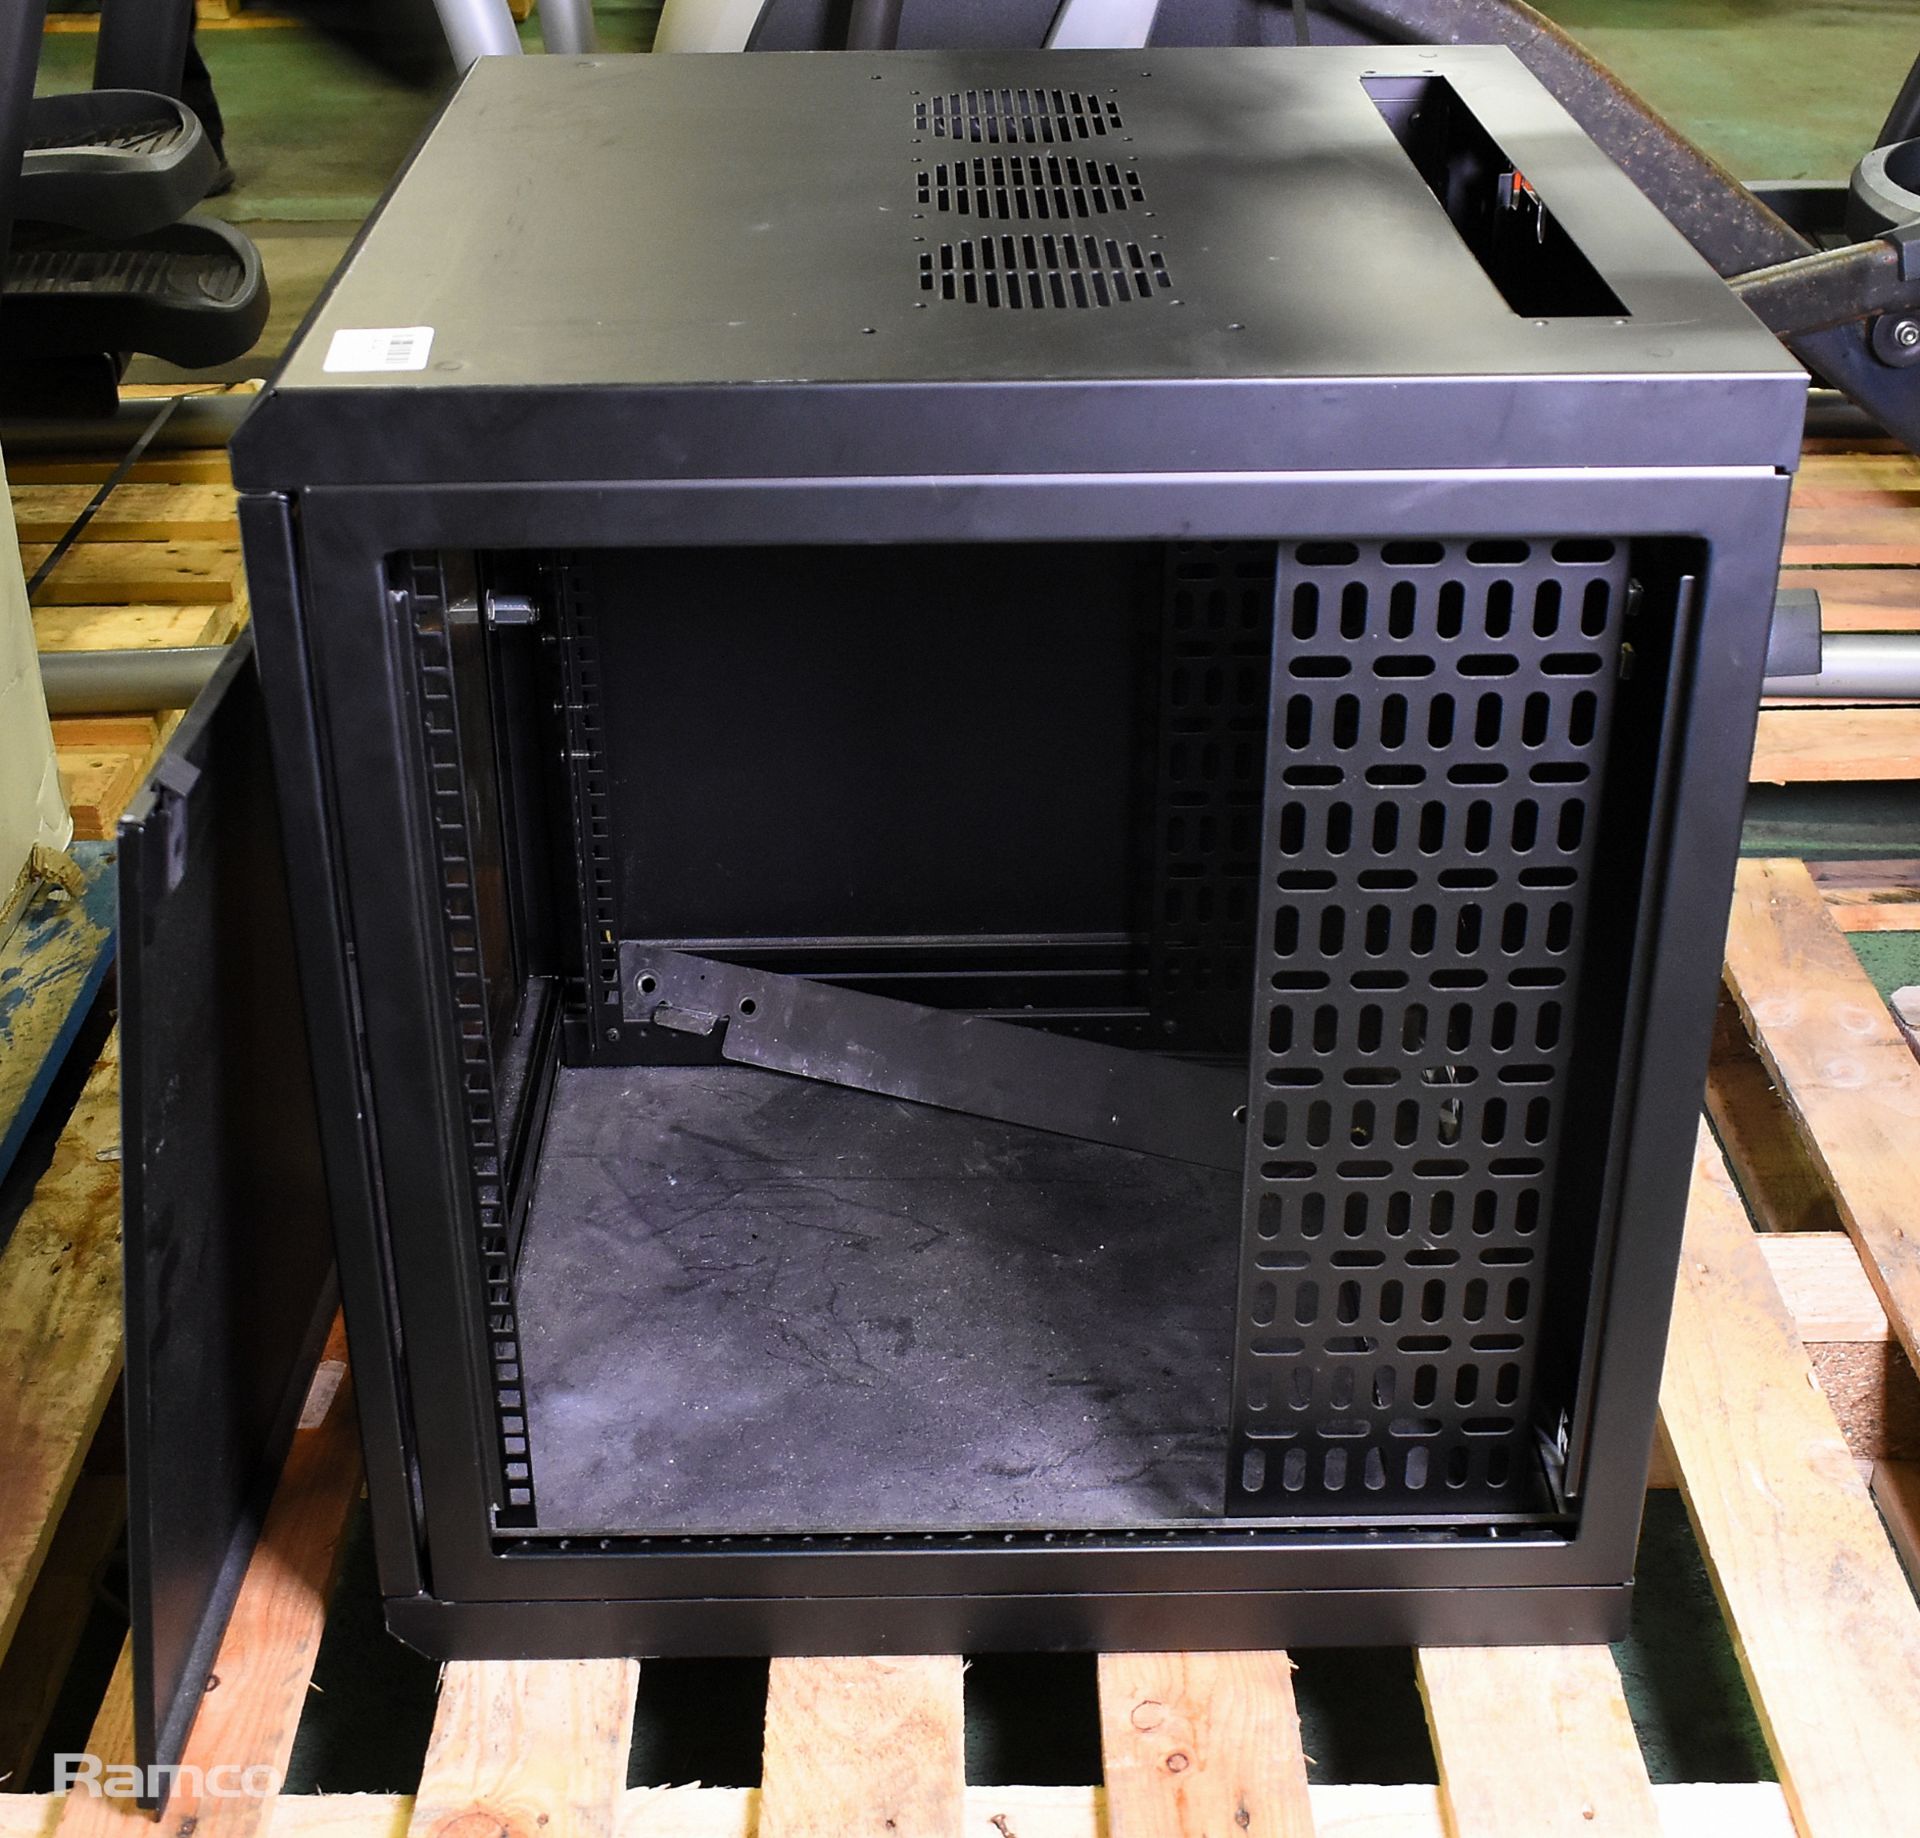 19 inch rack small cabinet - Black - W 600 x D 600 x H 640 mm - Image 5 of 5